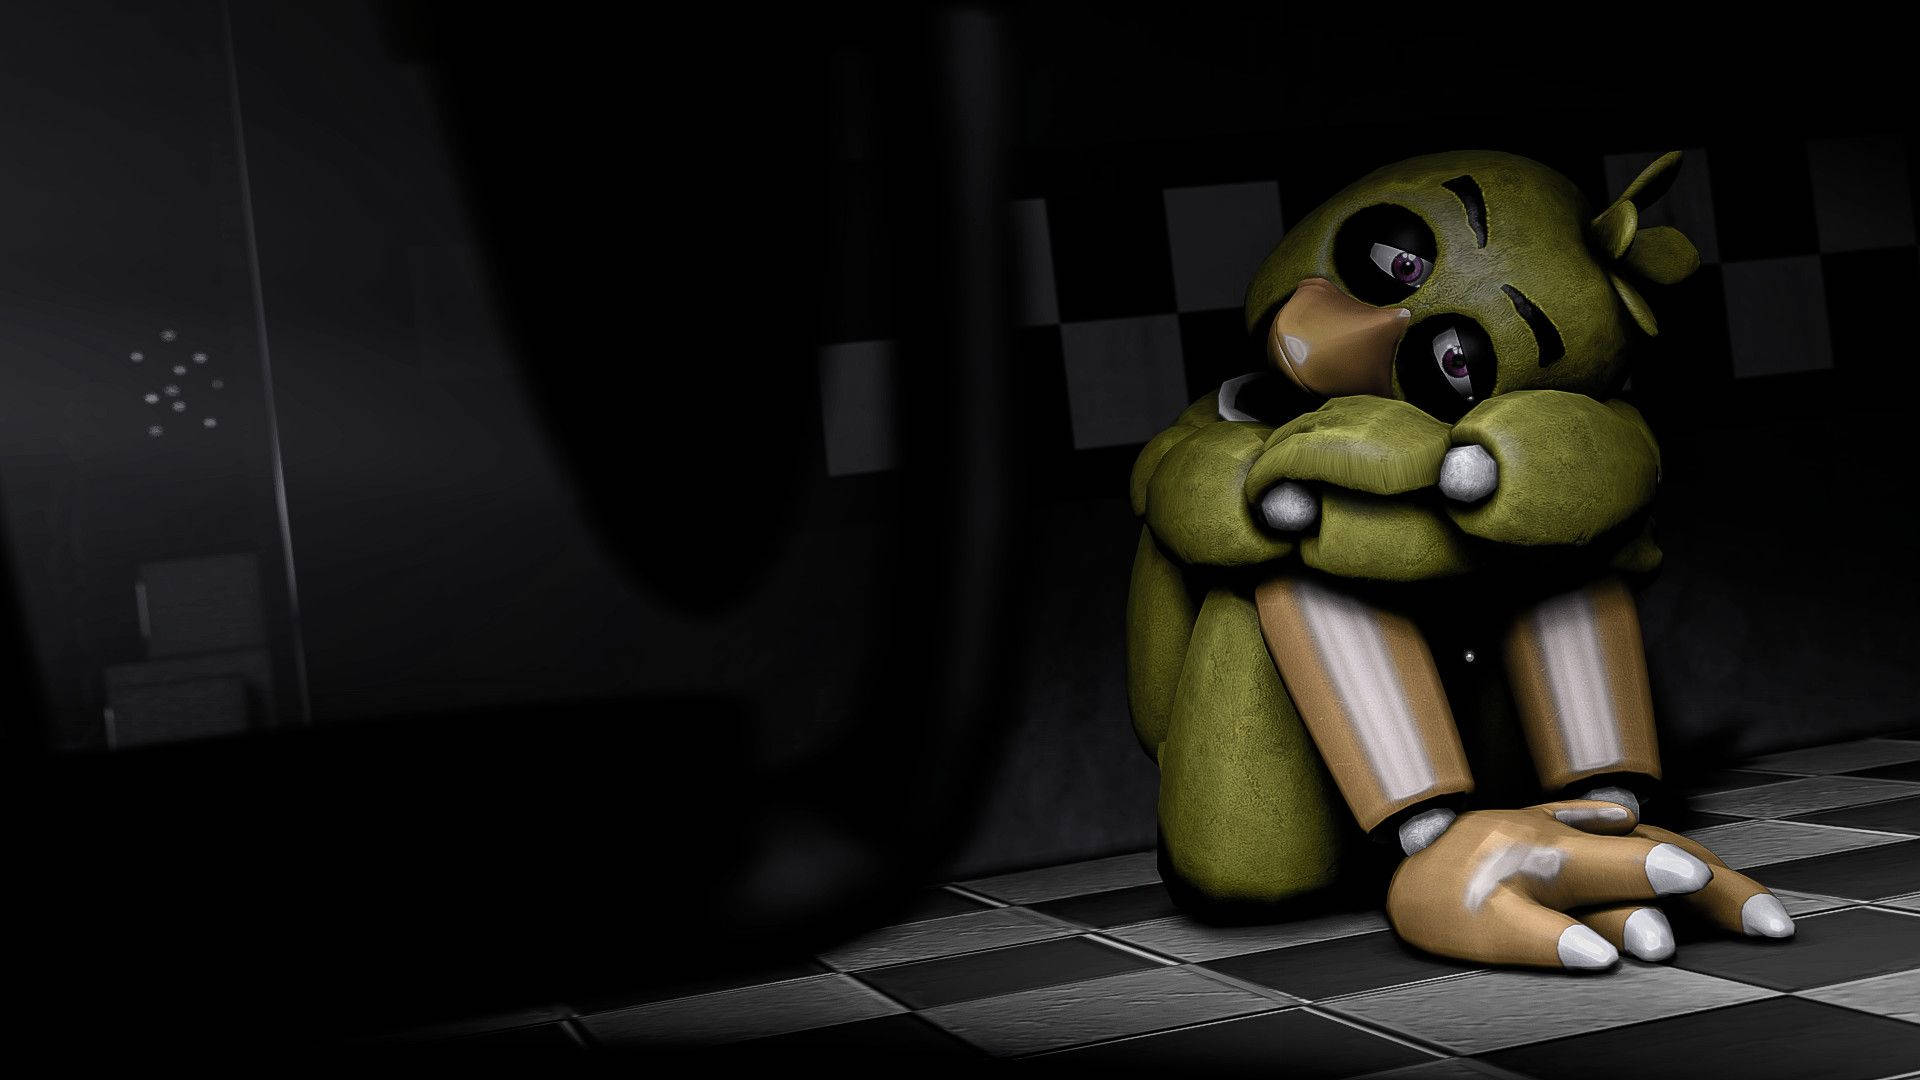 100+] Chica Fnaf Wallpapers